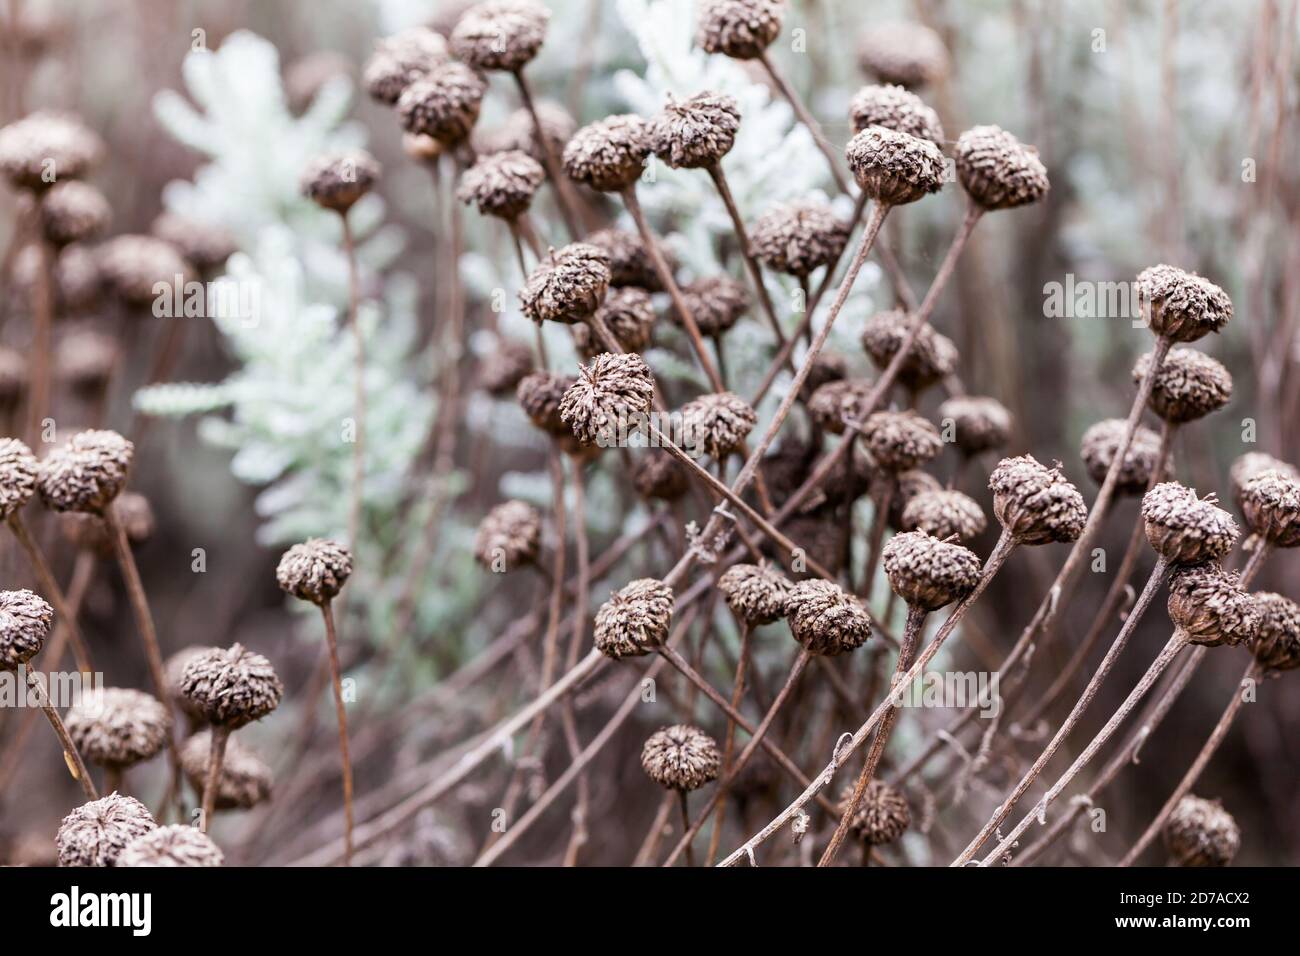 Structure in Garden Design / Botanic beauty concept - High-Resolution Close-up of seedheads in Autumn.  Brown/ Sepia tones Stock Photo